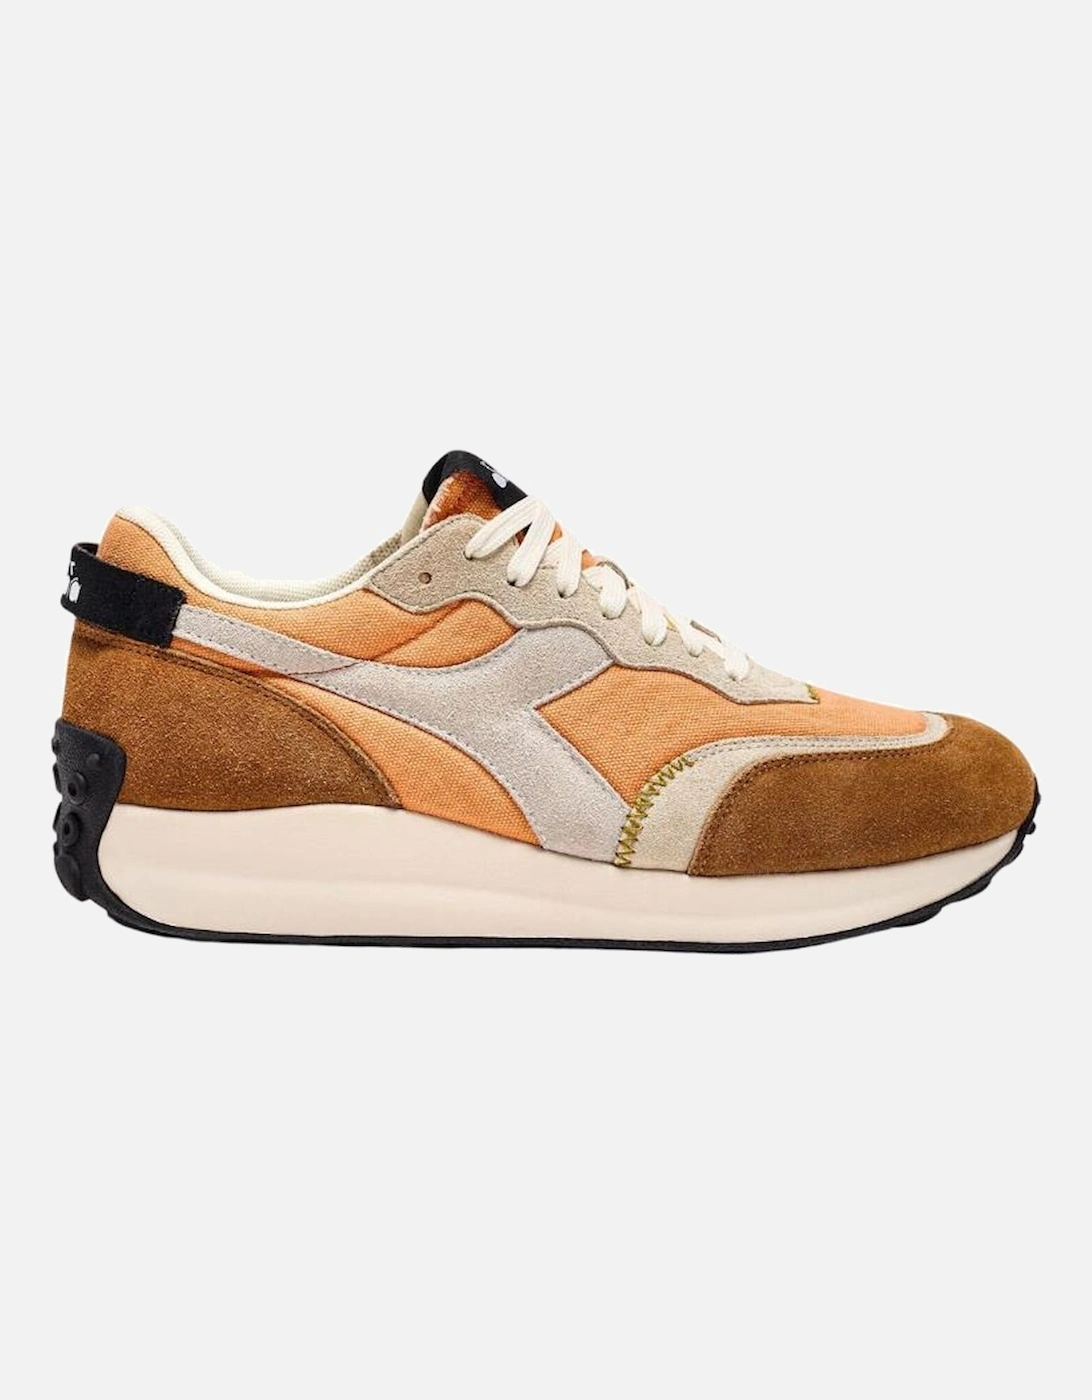 Race Suede SW - Autumn Sunset/Cathay Spice, 7 of 6